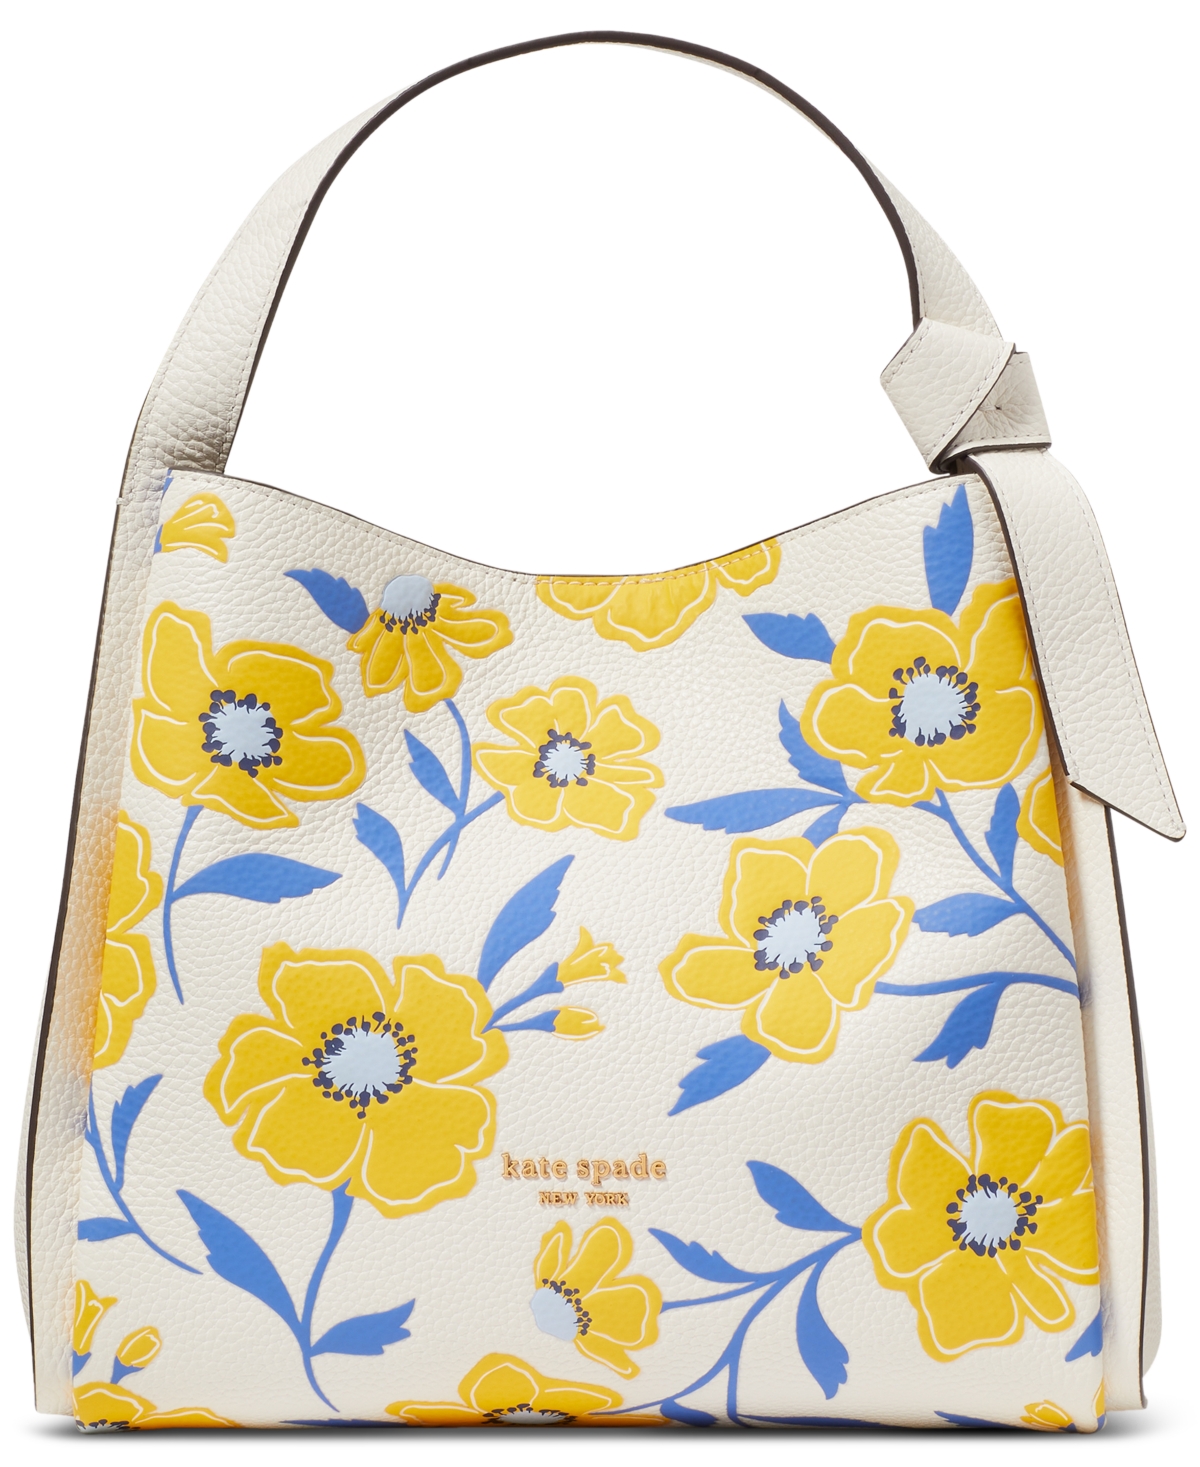 KATE SPADE KNOTT SUNSHINE FLORAL EMBOSSED PEBBLED LEATHER SMALL CROSSBODY TOTE